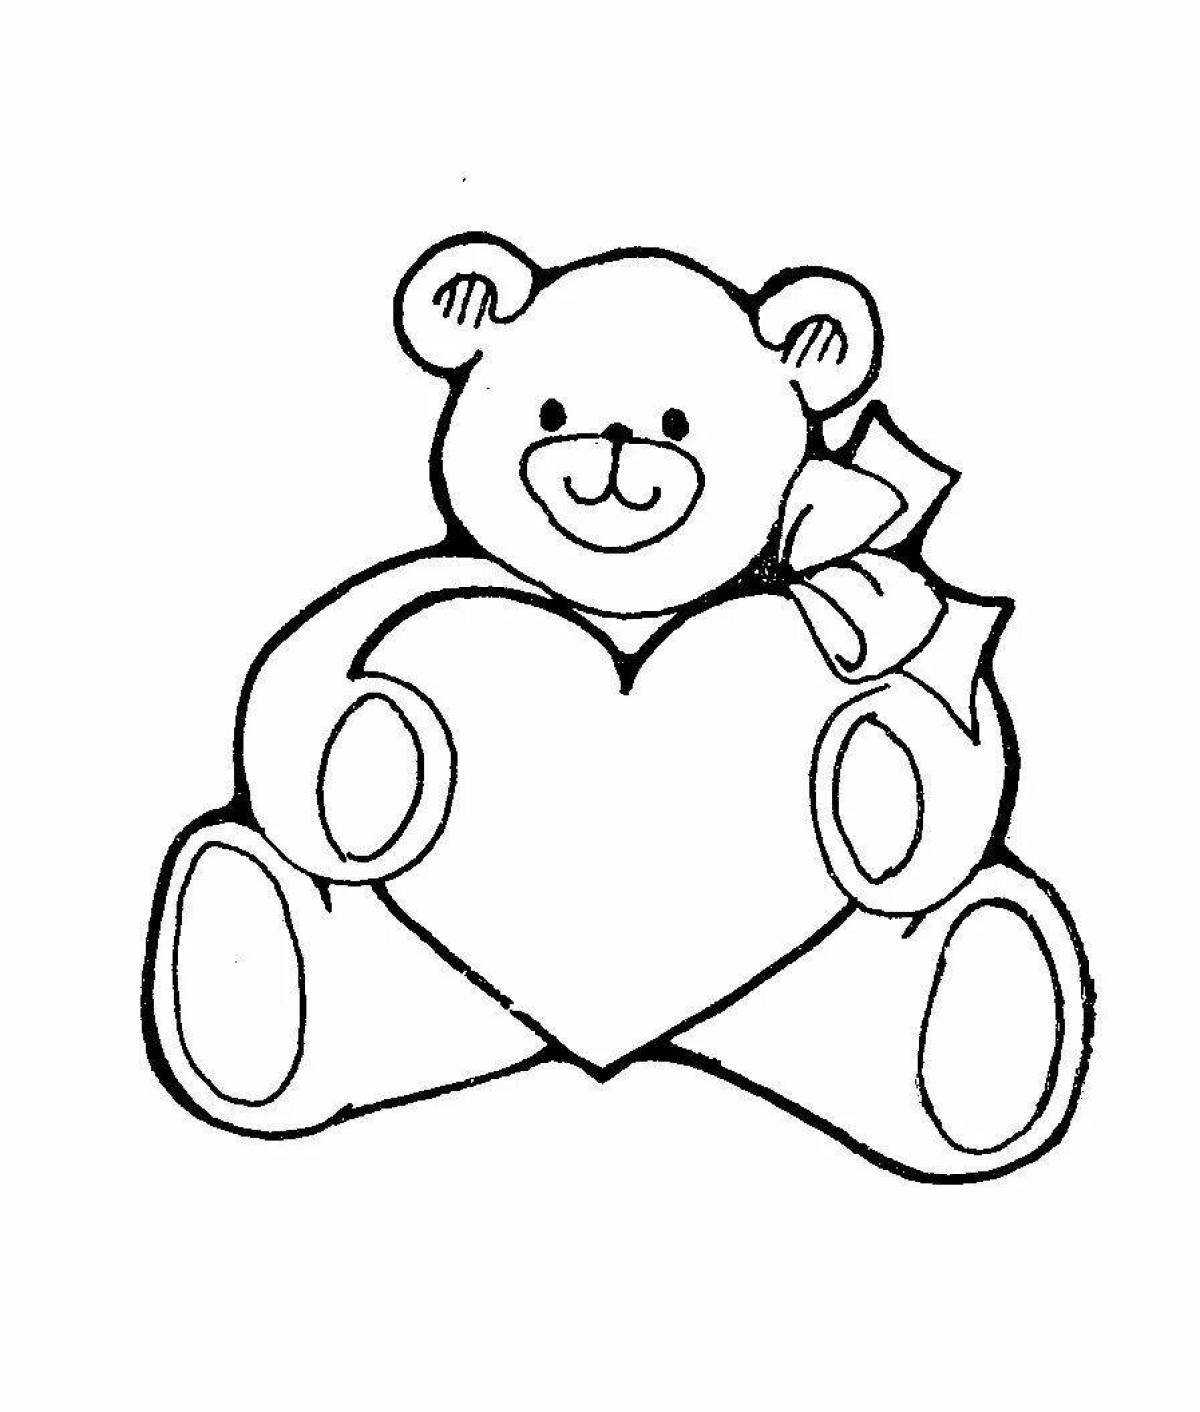 Loving bear with heart coloring page